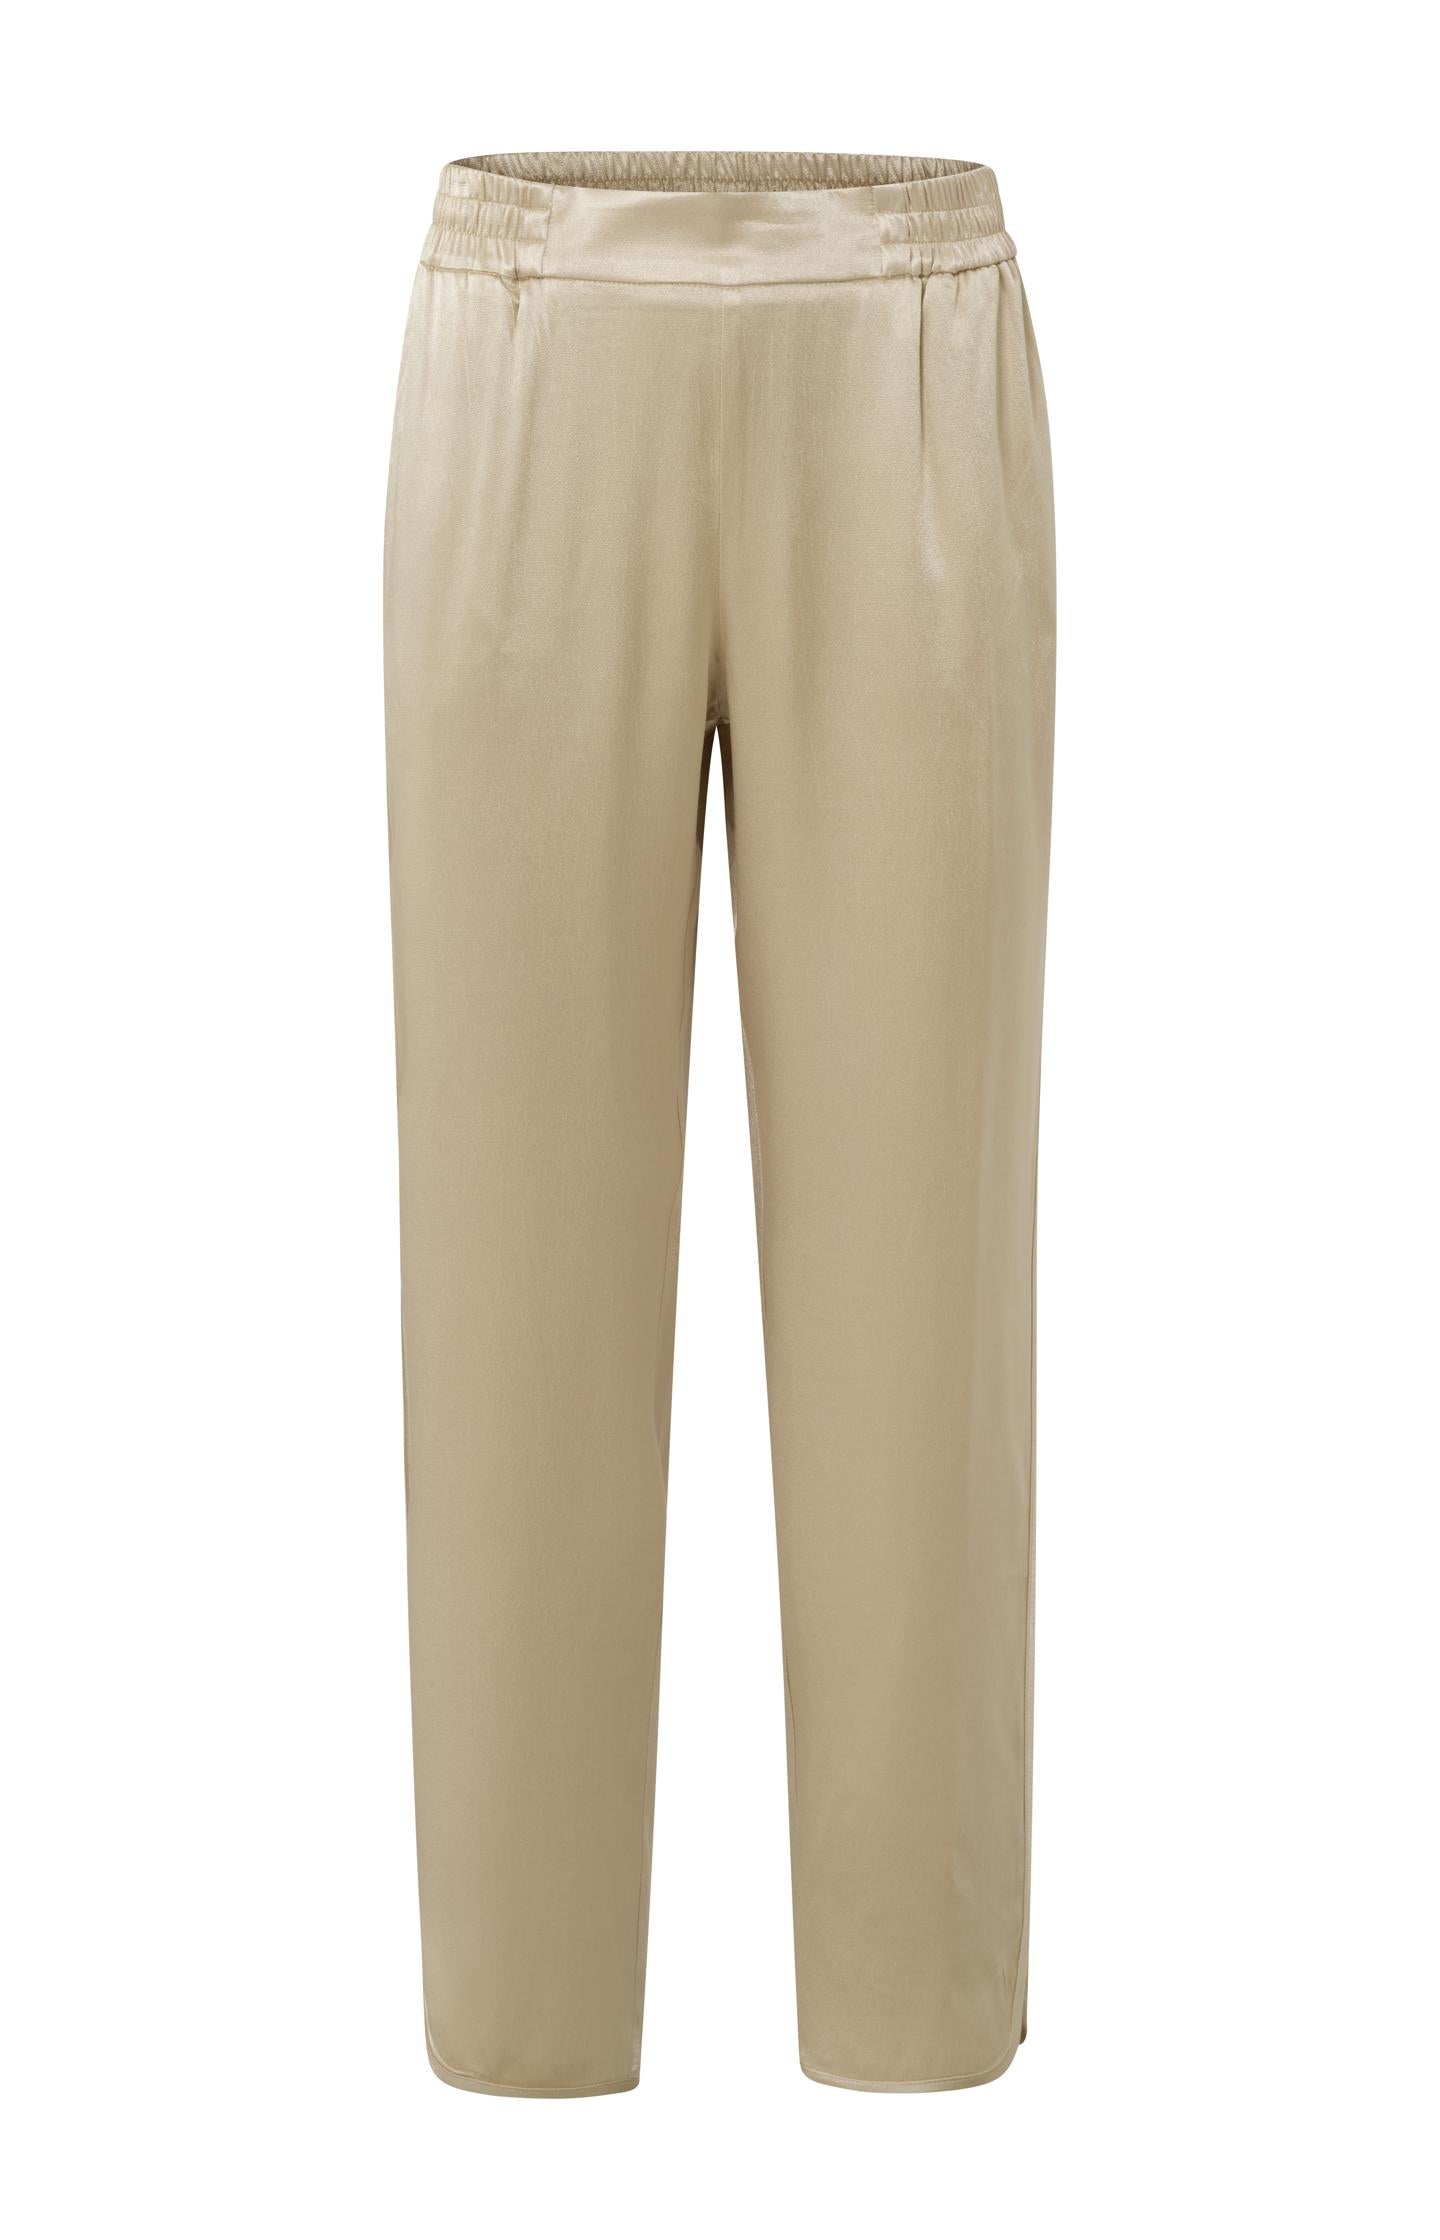 Satin jogging trousers with elastic waist and side pockets - Type: product